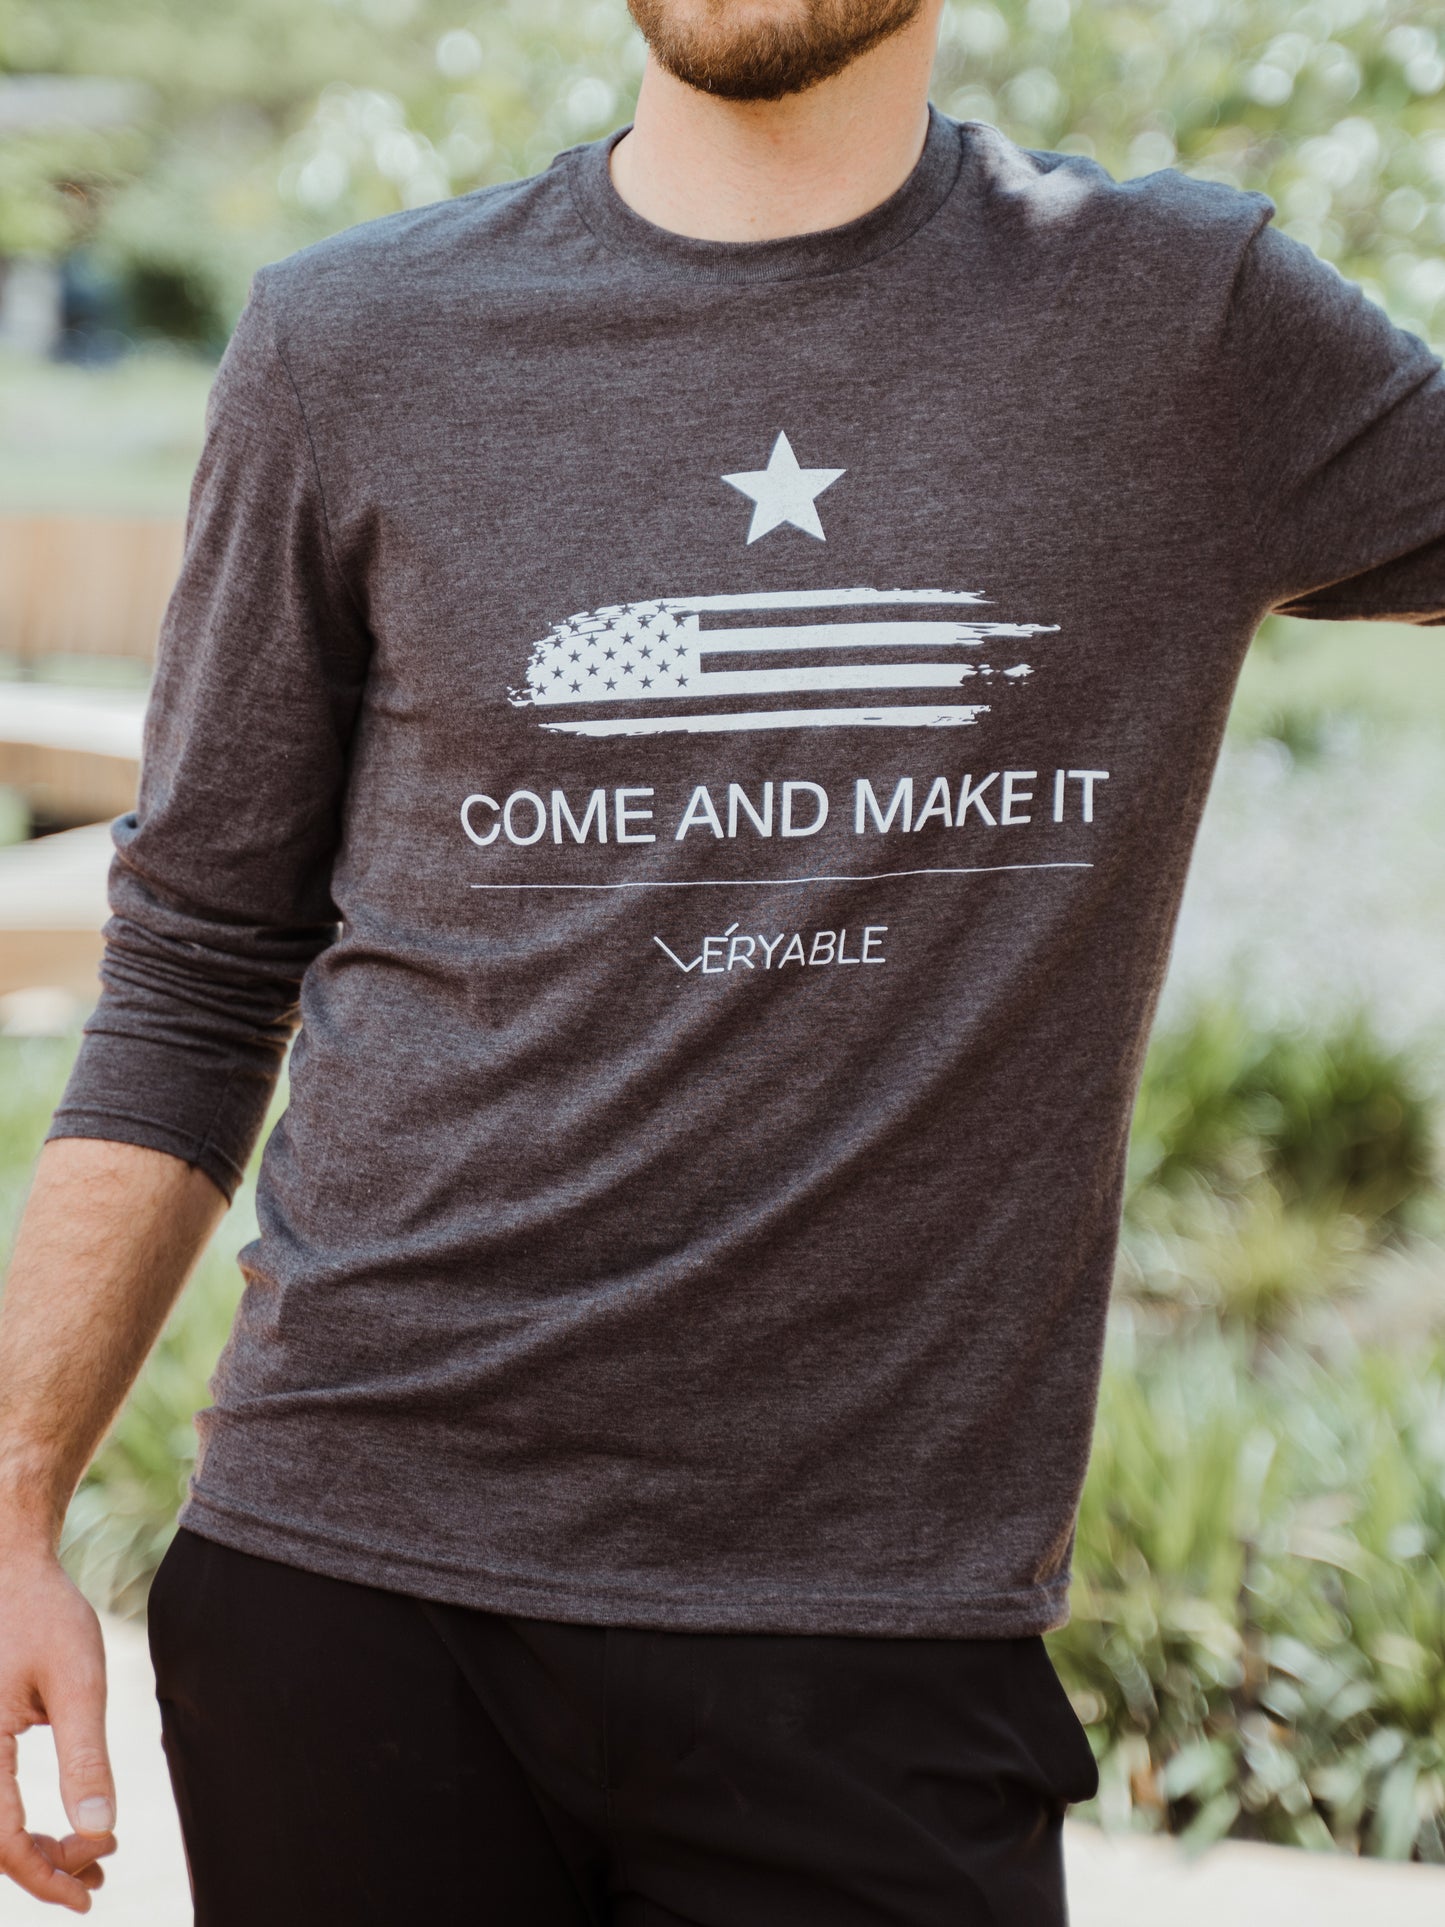 Veryable "Come And Make It" Long Sleeve T-Shirt